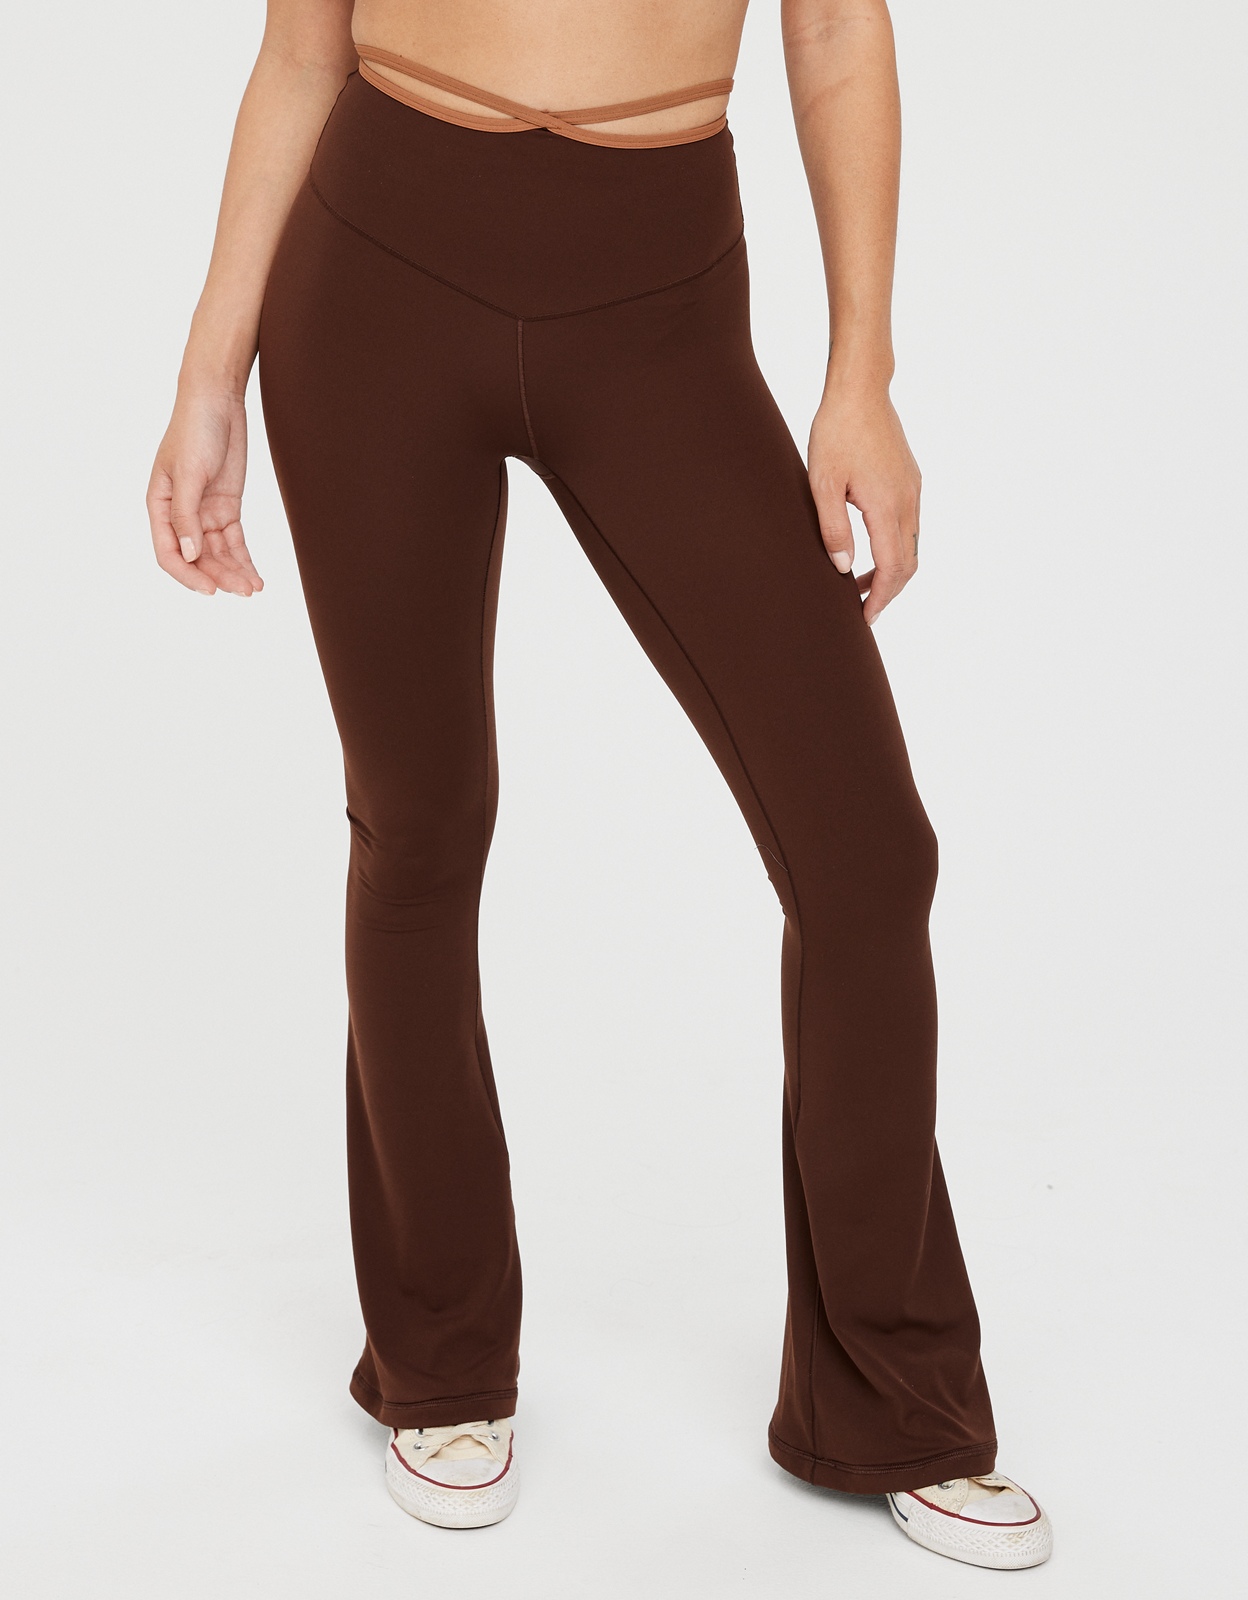 Buy OFFLINE By Aerie Real Me Strappy Flare Legging online